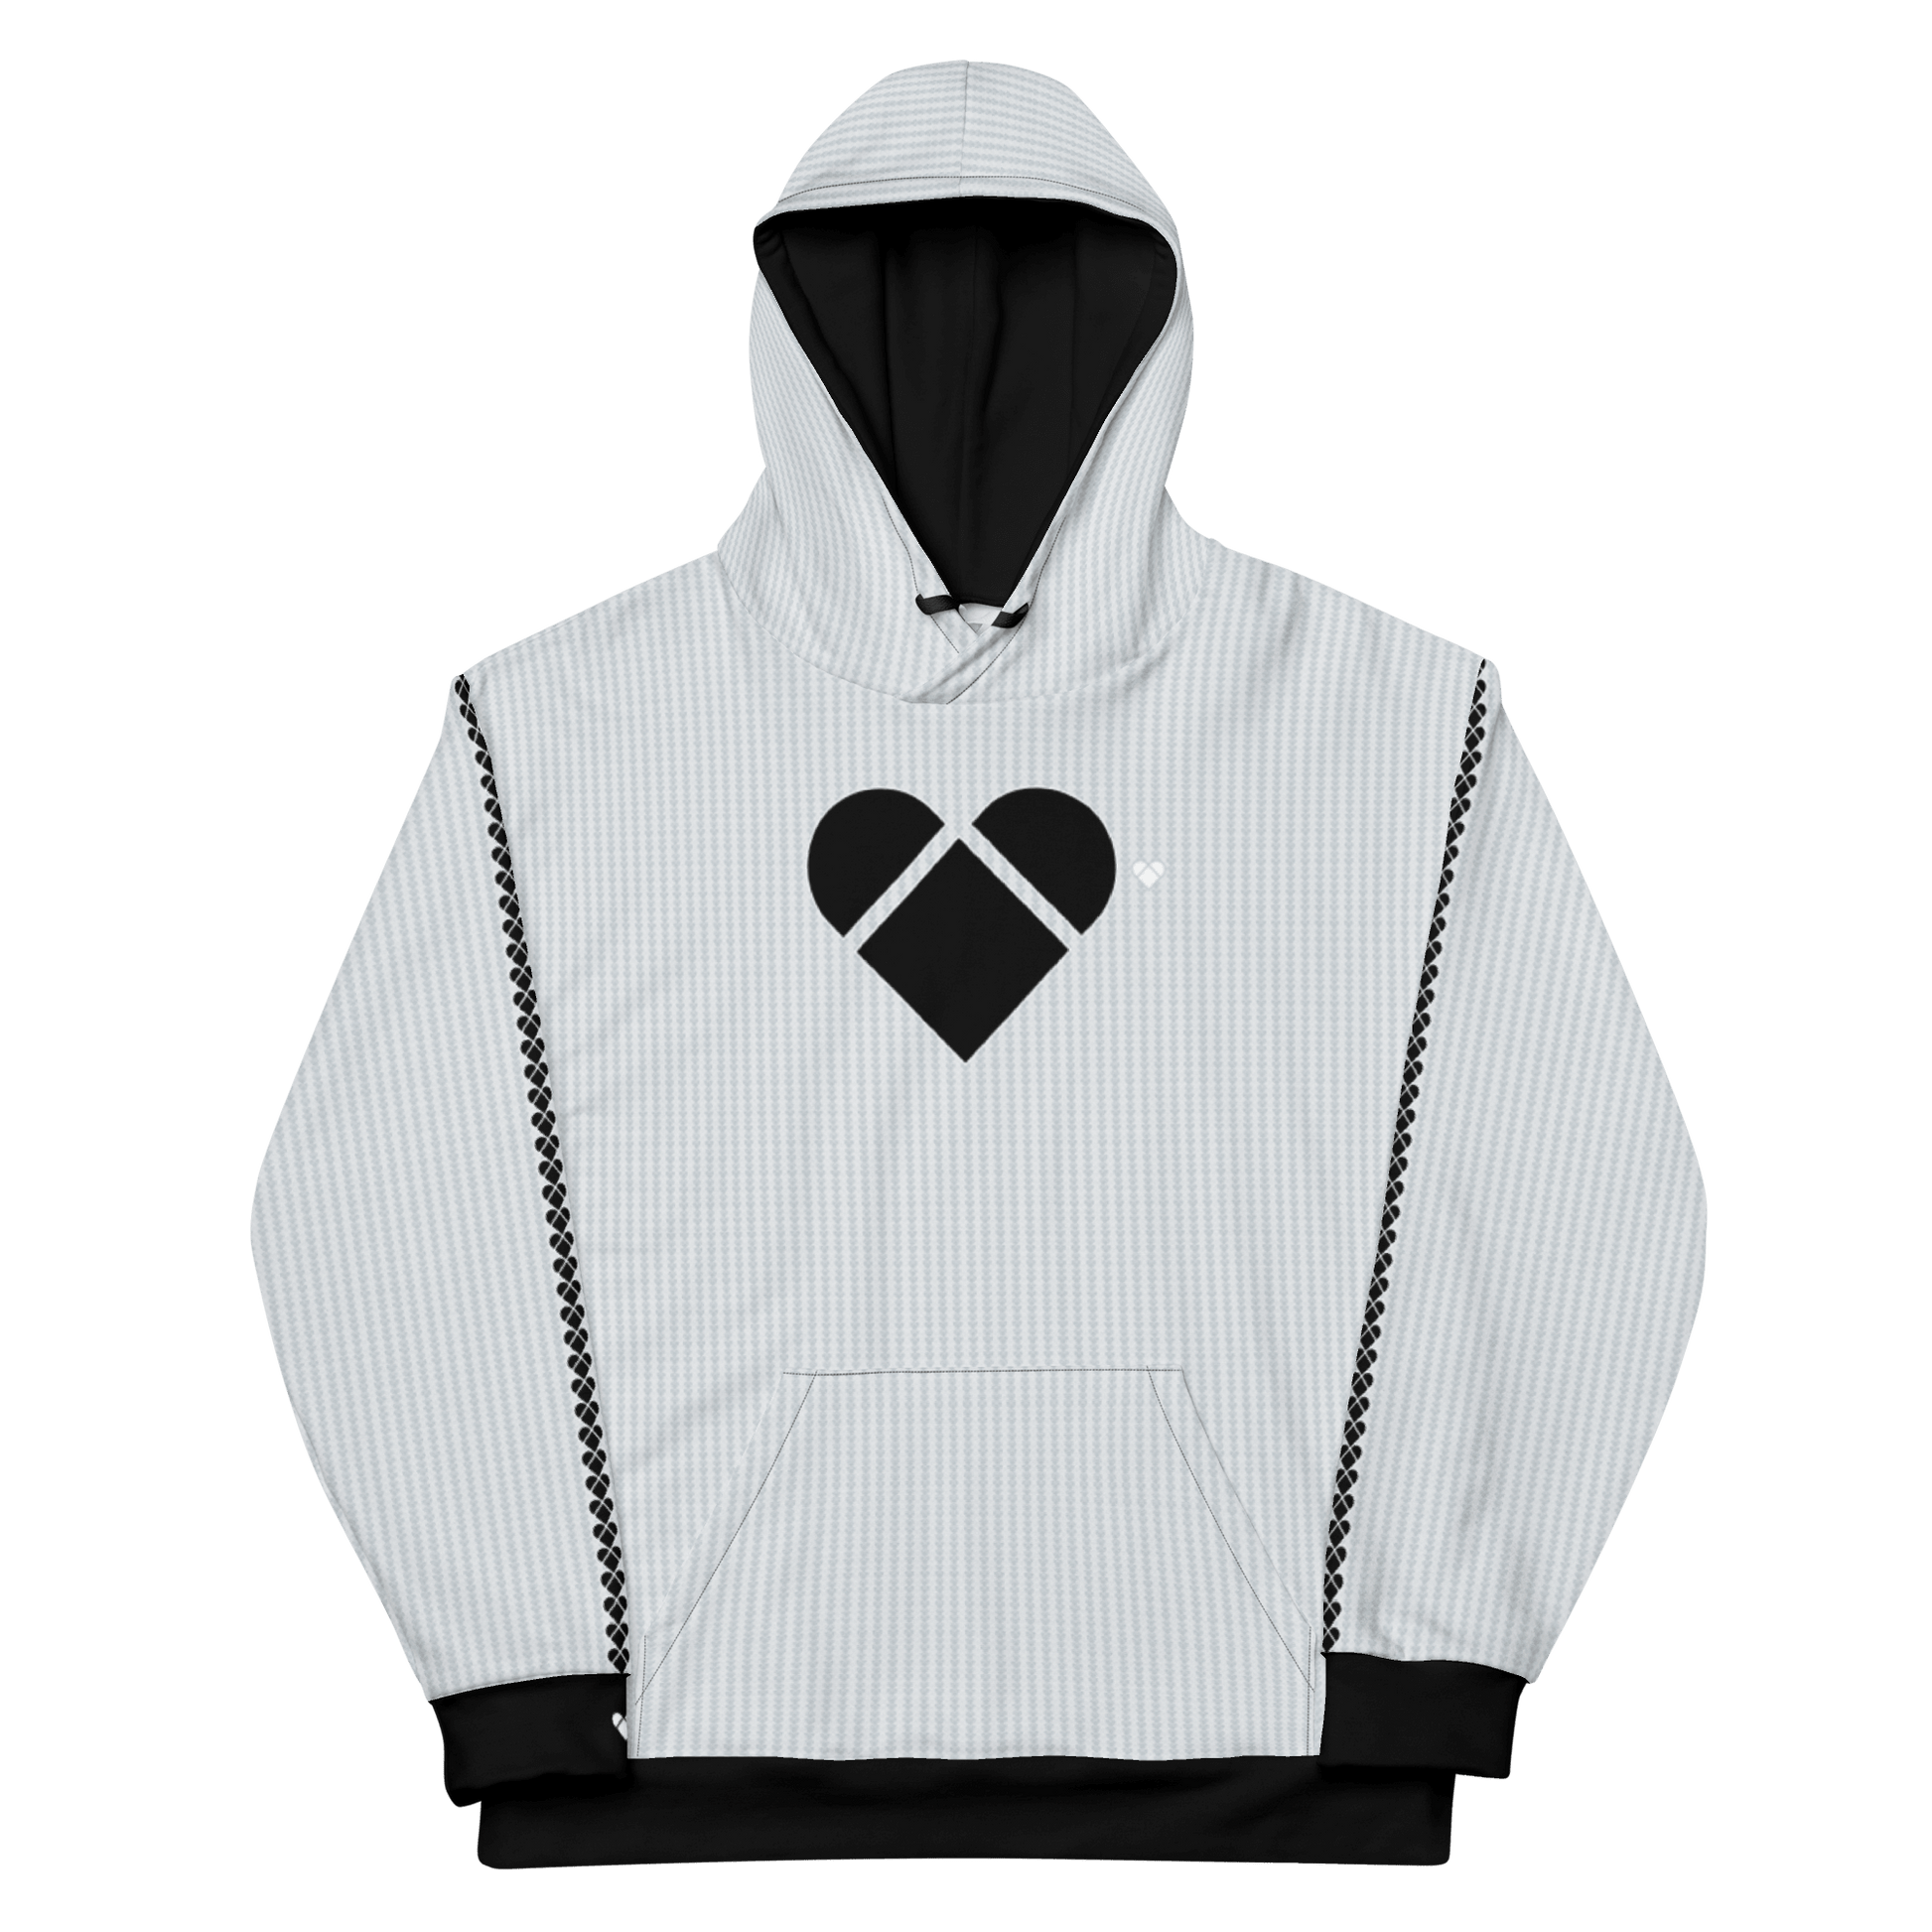 Lovogram Hoodie with black collar, cuffs, and waistband, and white heart logo in the cuff, front view